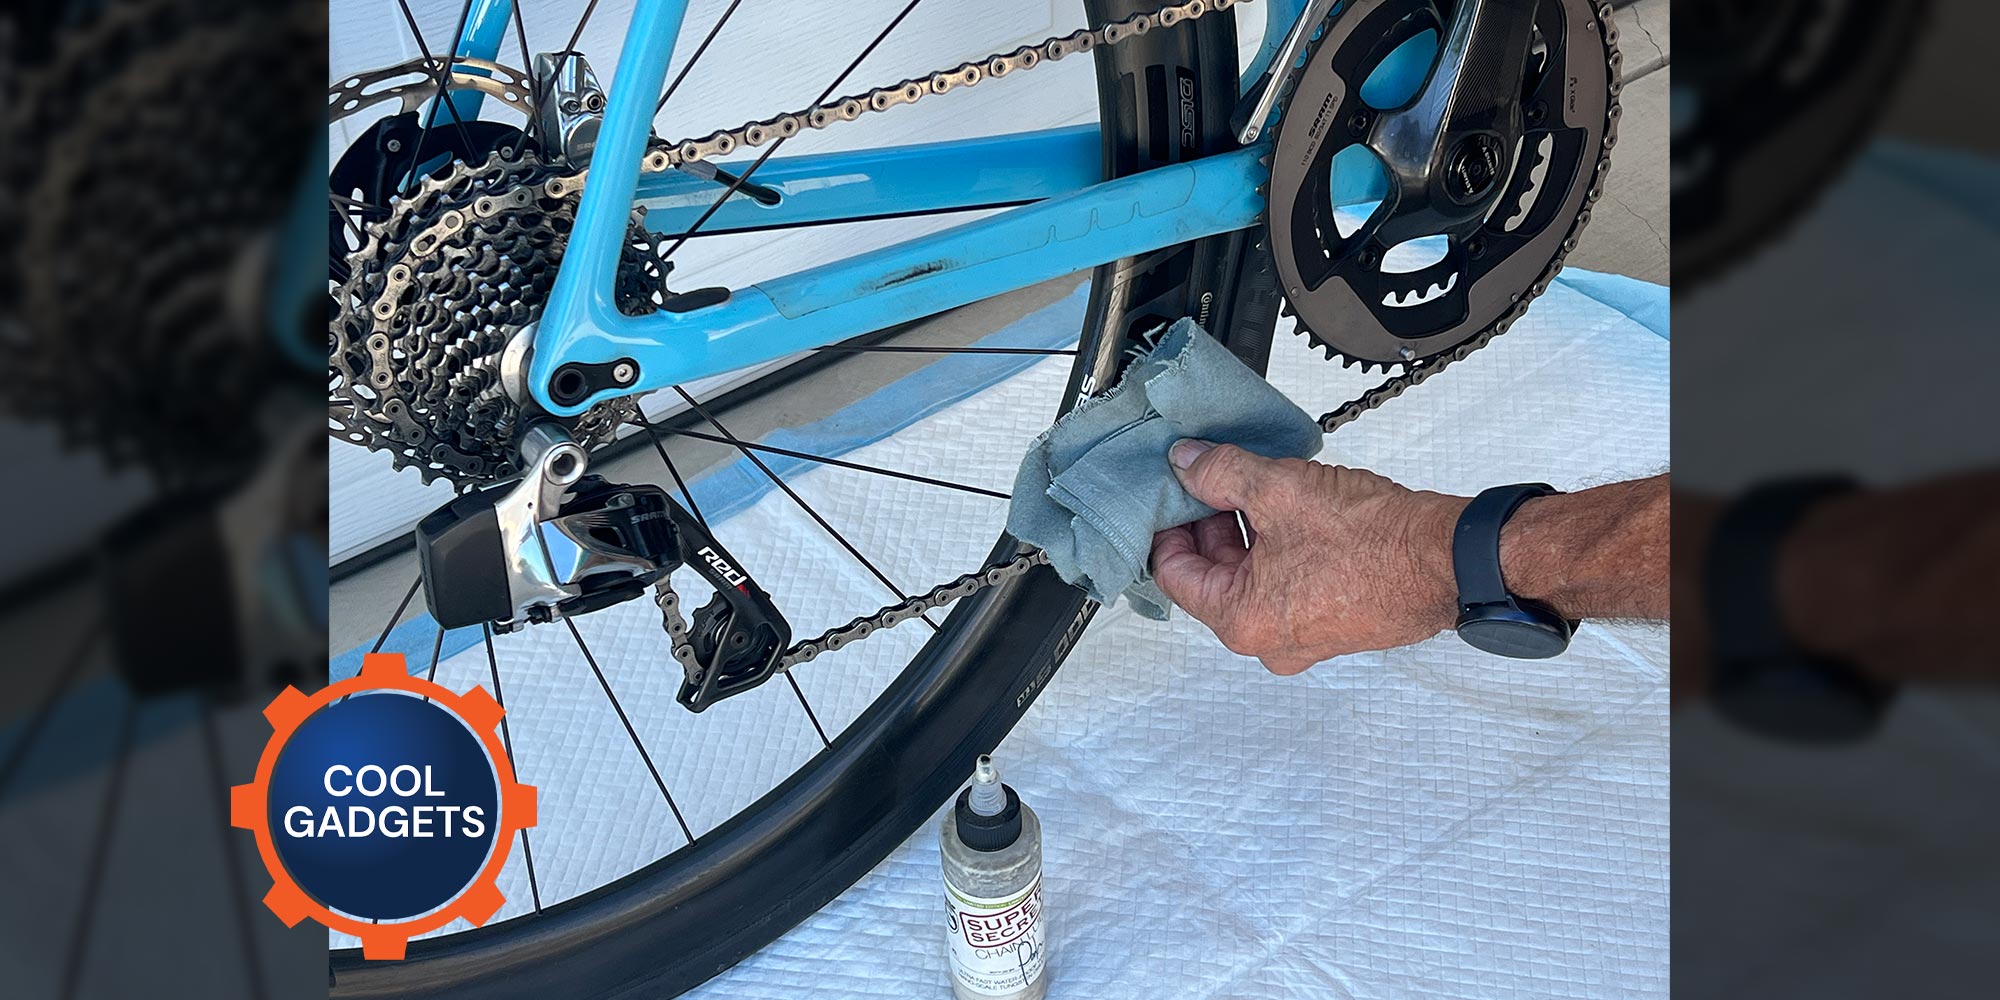 a piddle pad is used while oiling the chain of a bicycle